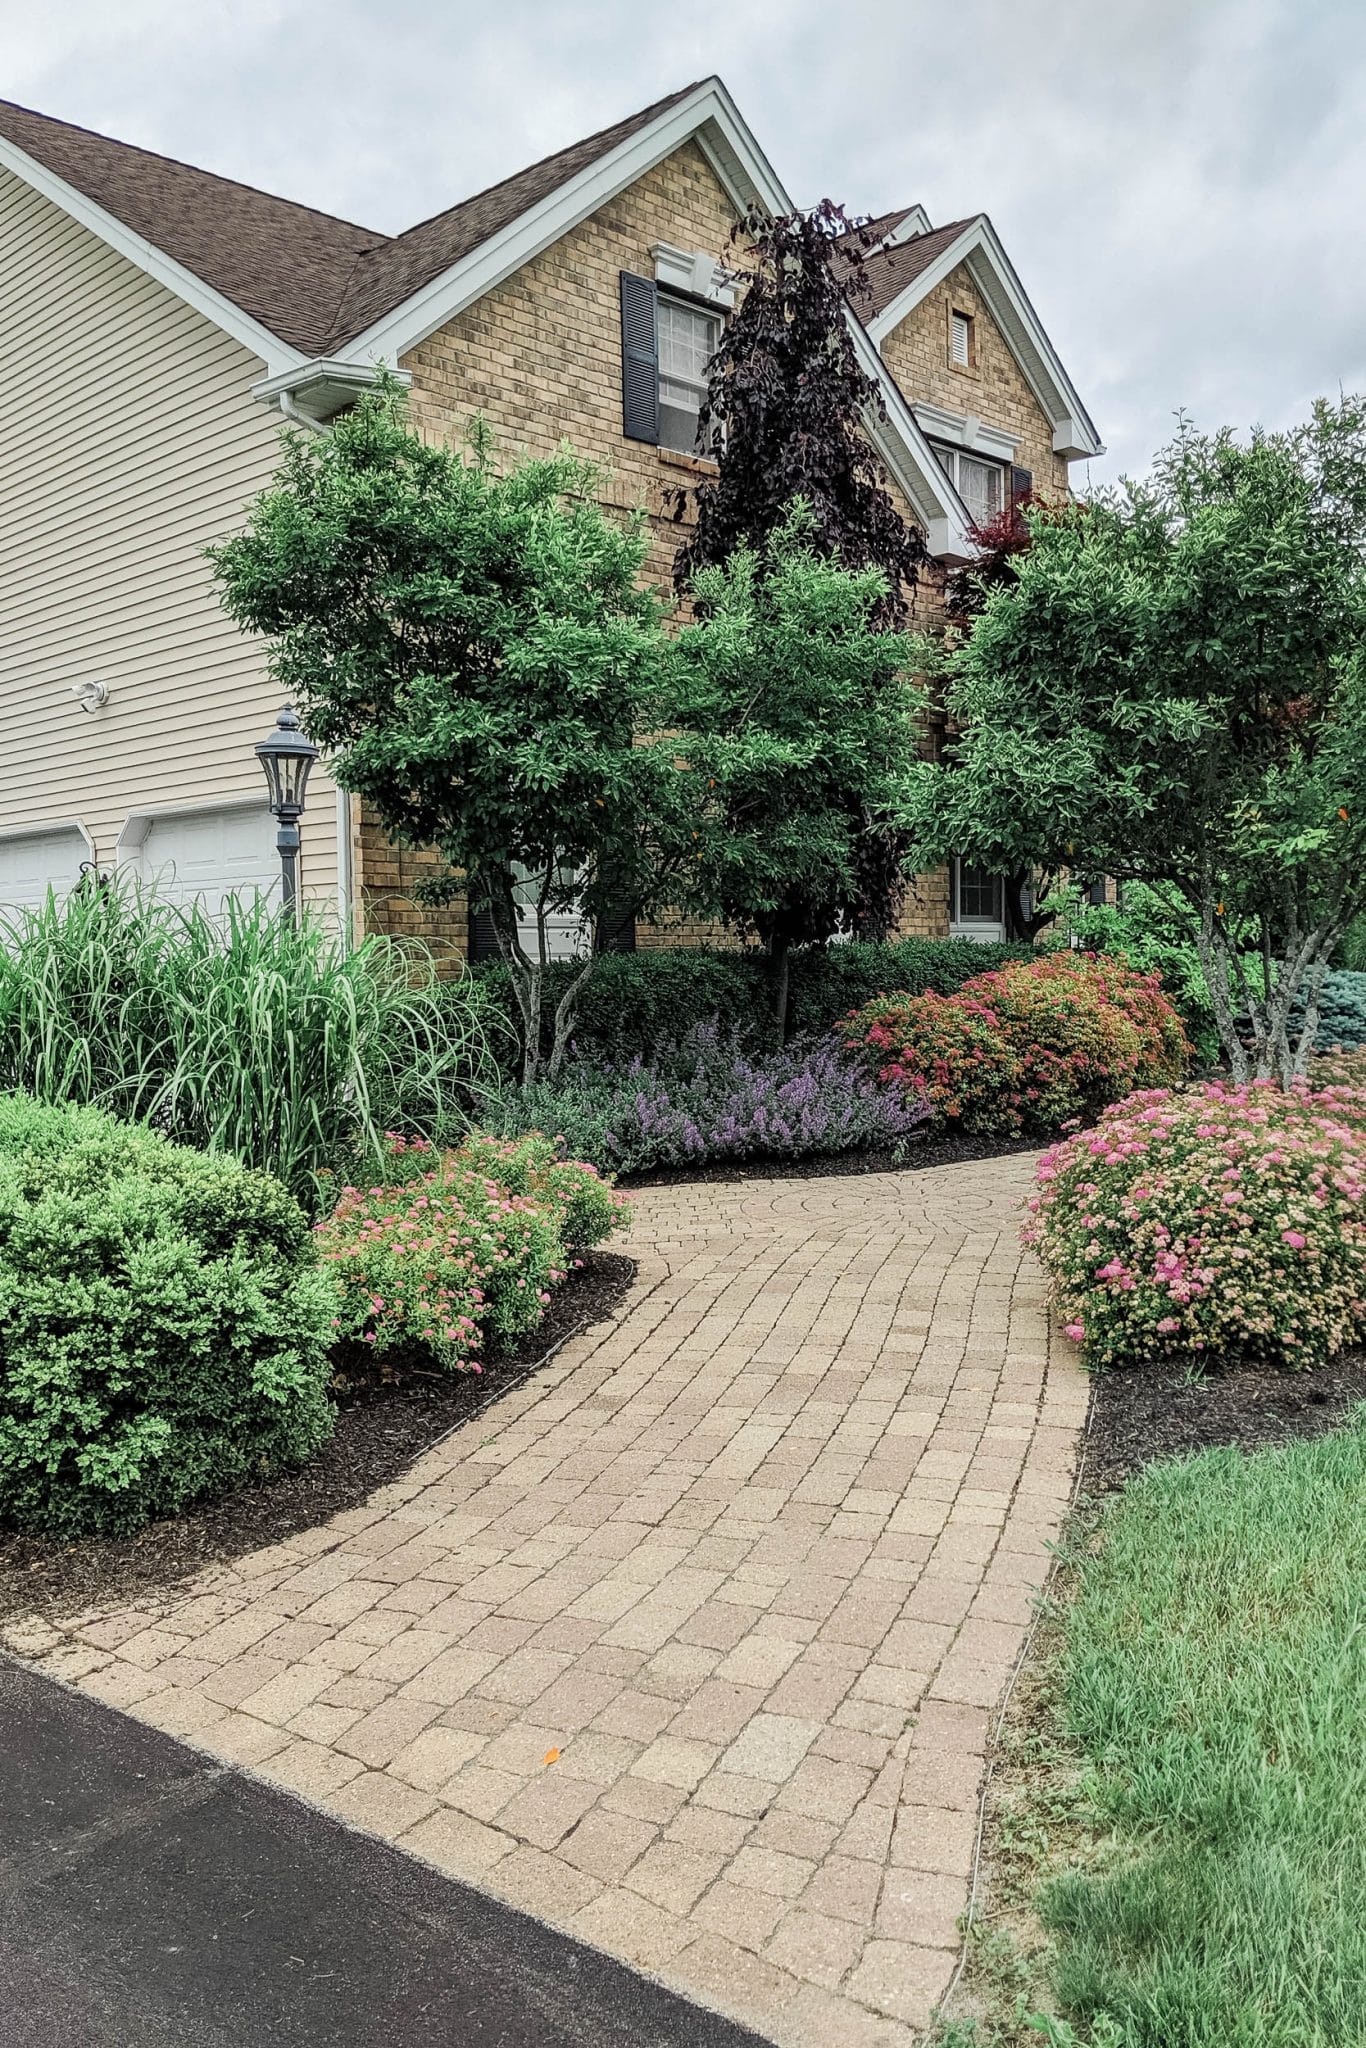 A classic paver walkway with native plantings including spirea, redbud trees, boxwood, and catmint in Gardiner, NY by Masseo Landscape, Inc.